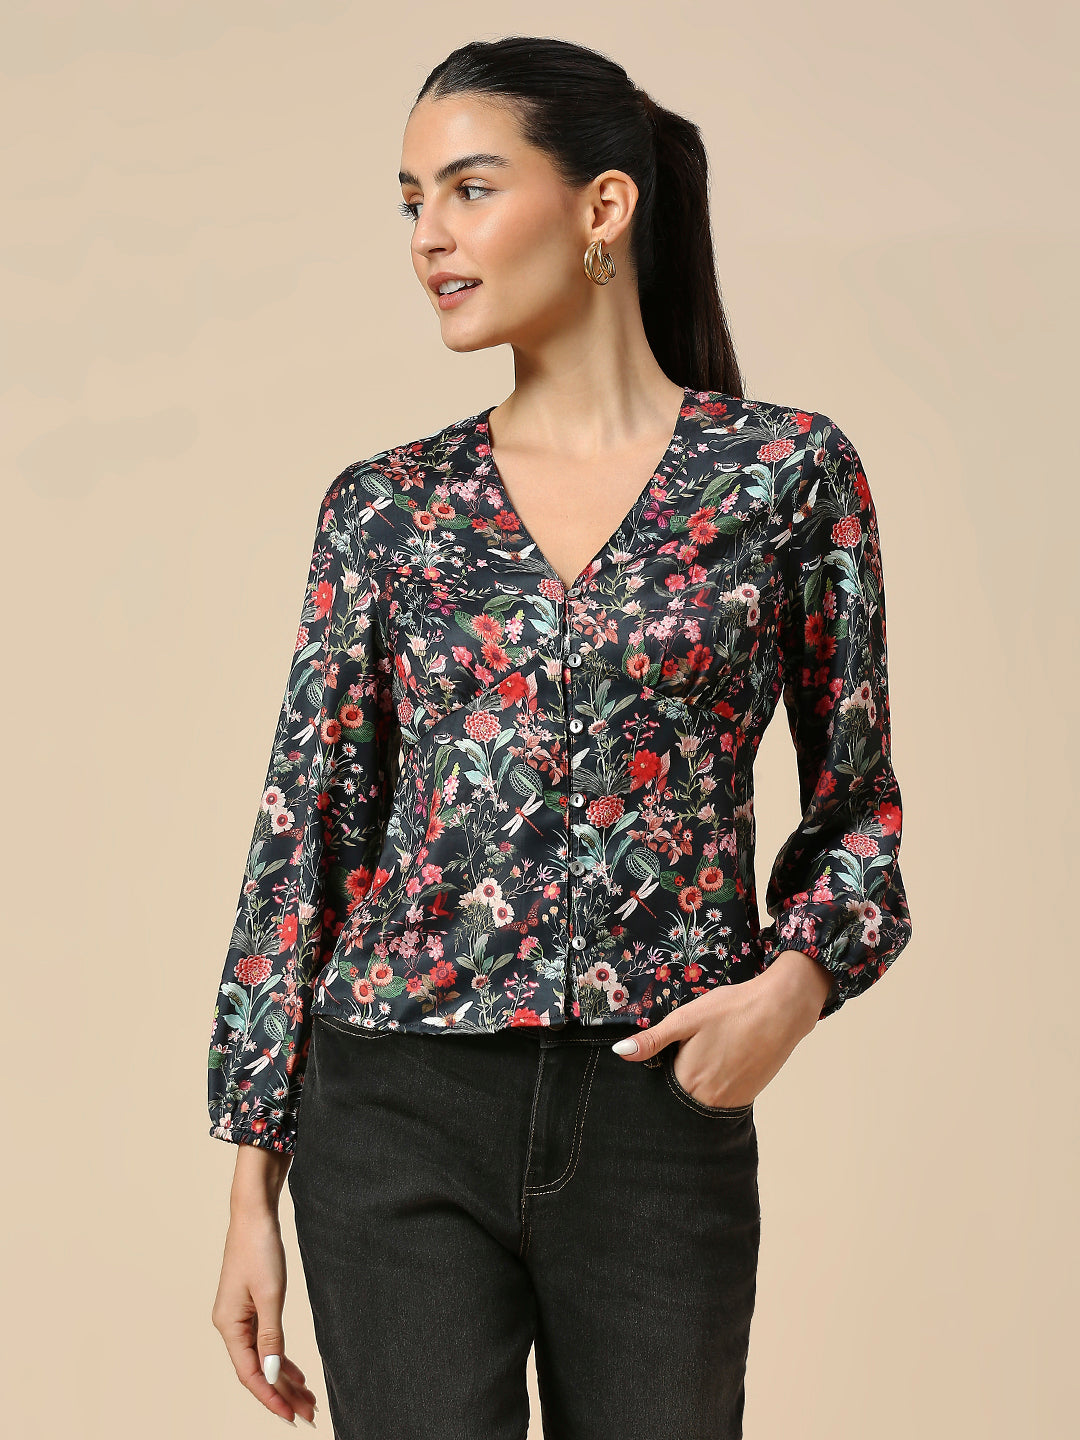 FLORAL PRINTED SATIN EMPIRE LINE TOP